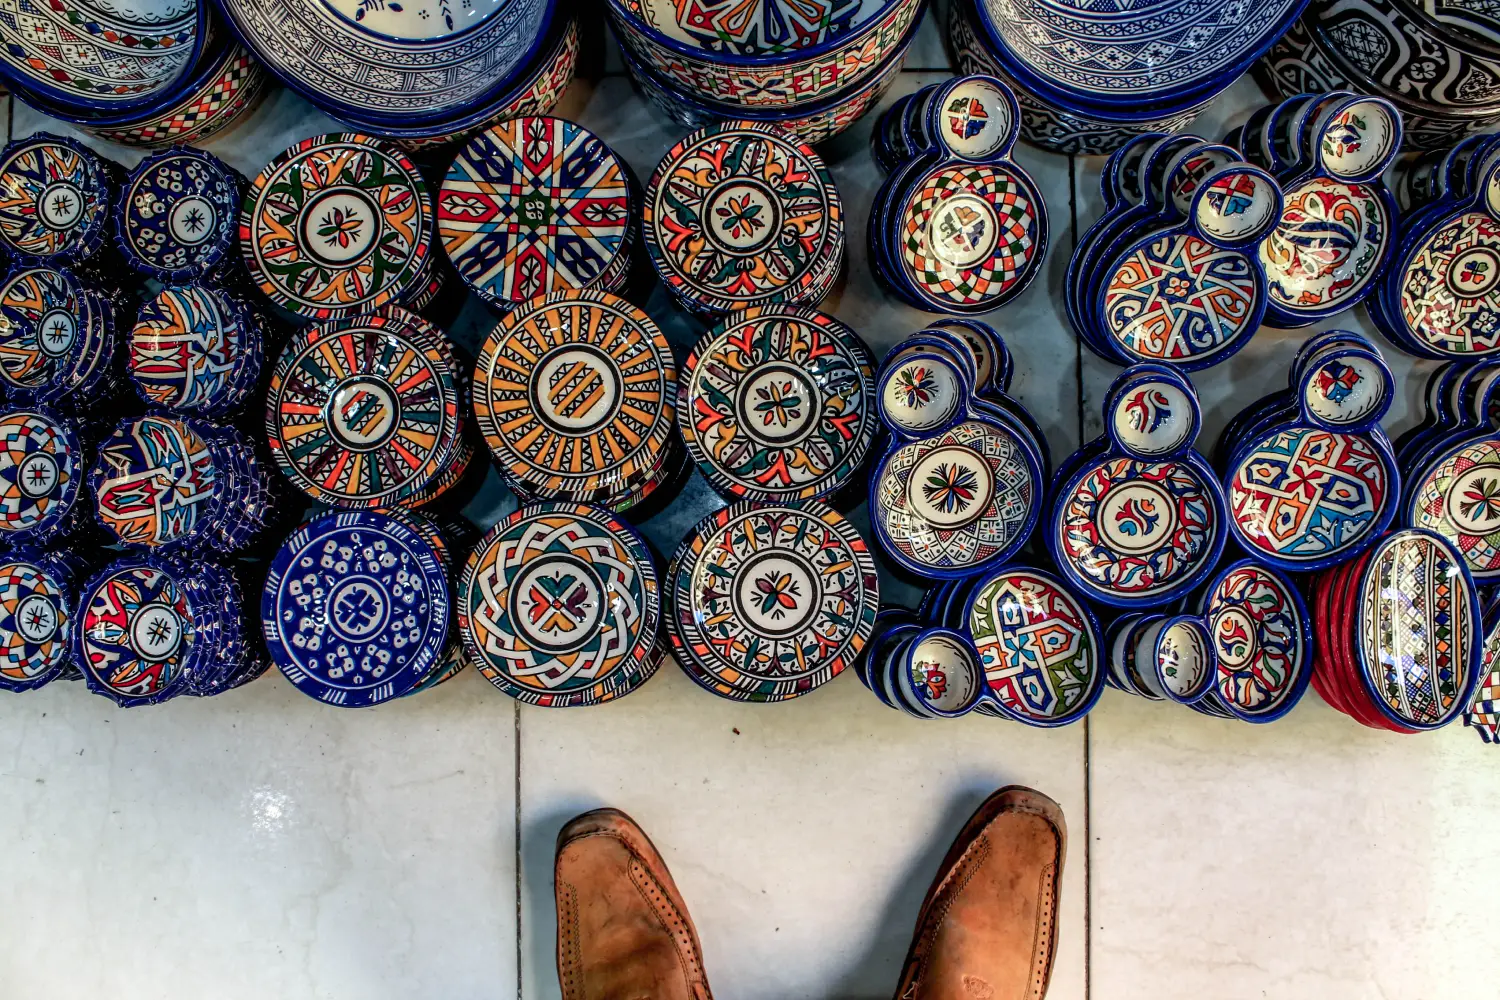 Ferry to Nador - Moroccan Ceramics. Beautiful ceramic handcrafts which make Morocco more special and wonderful.